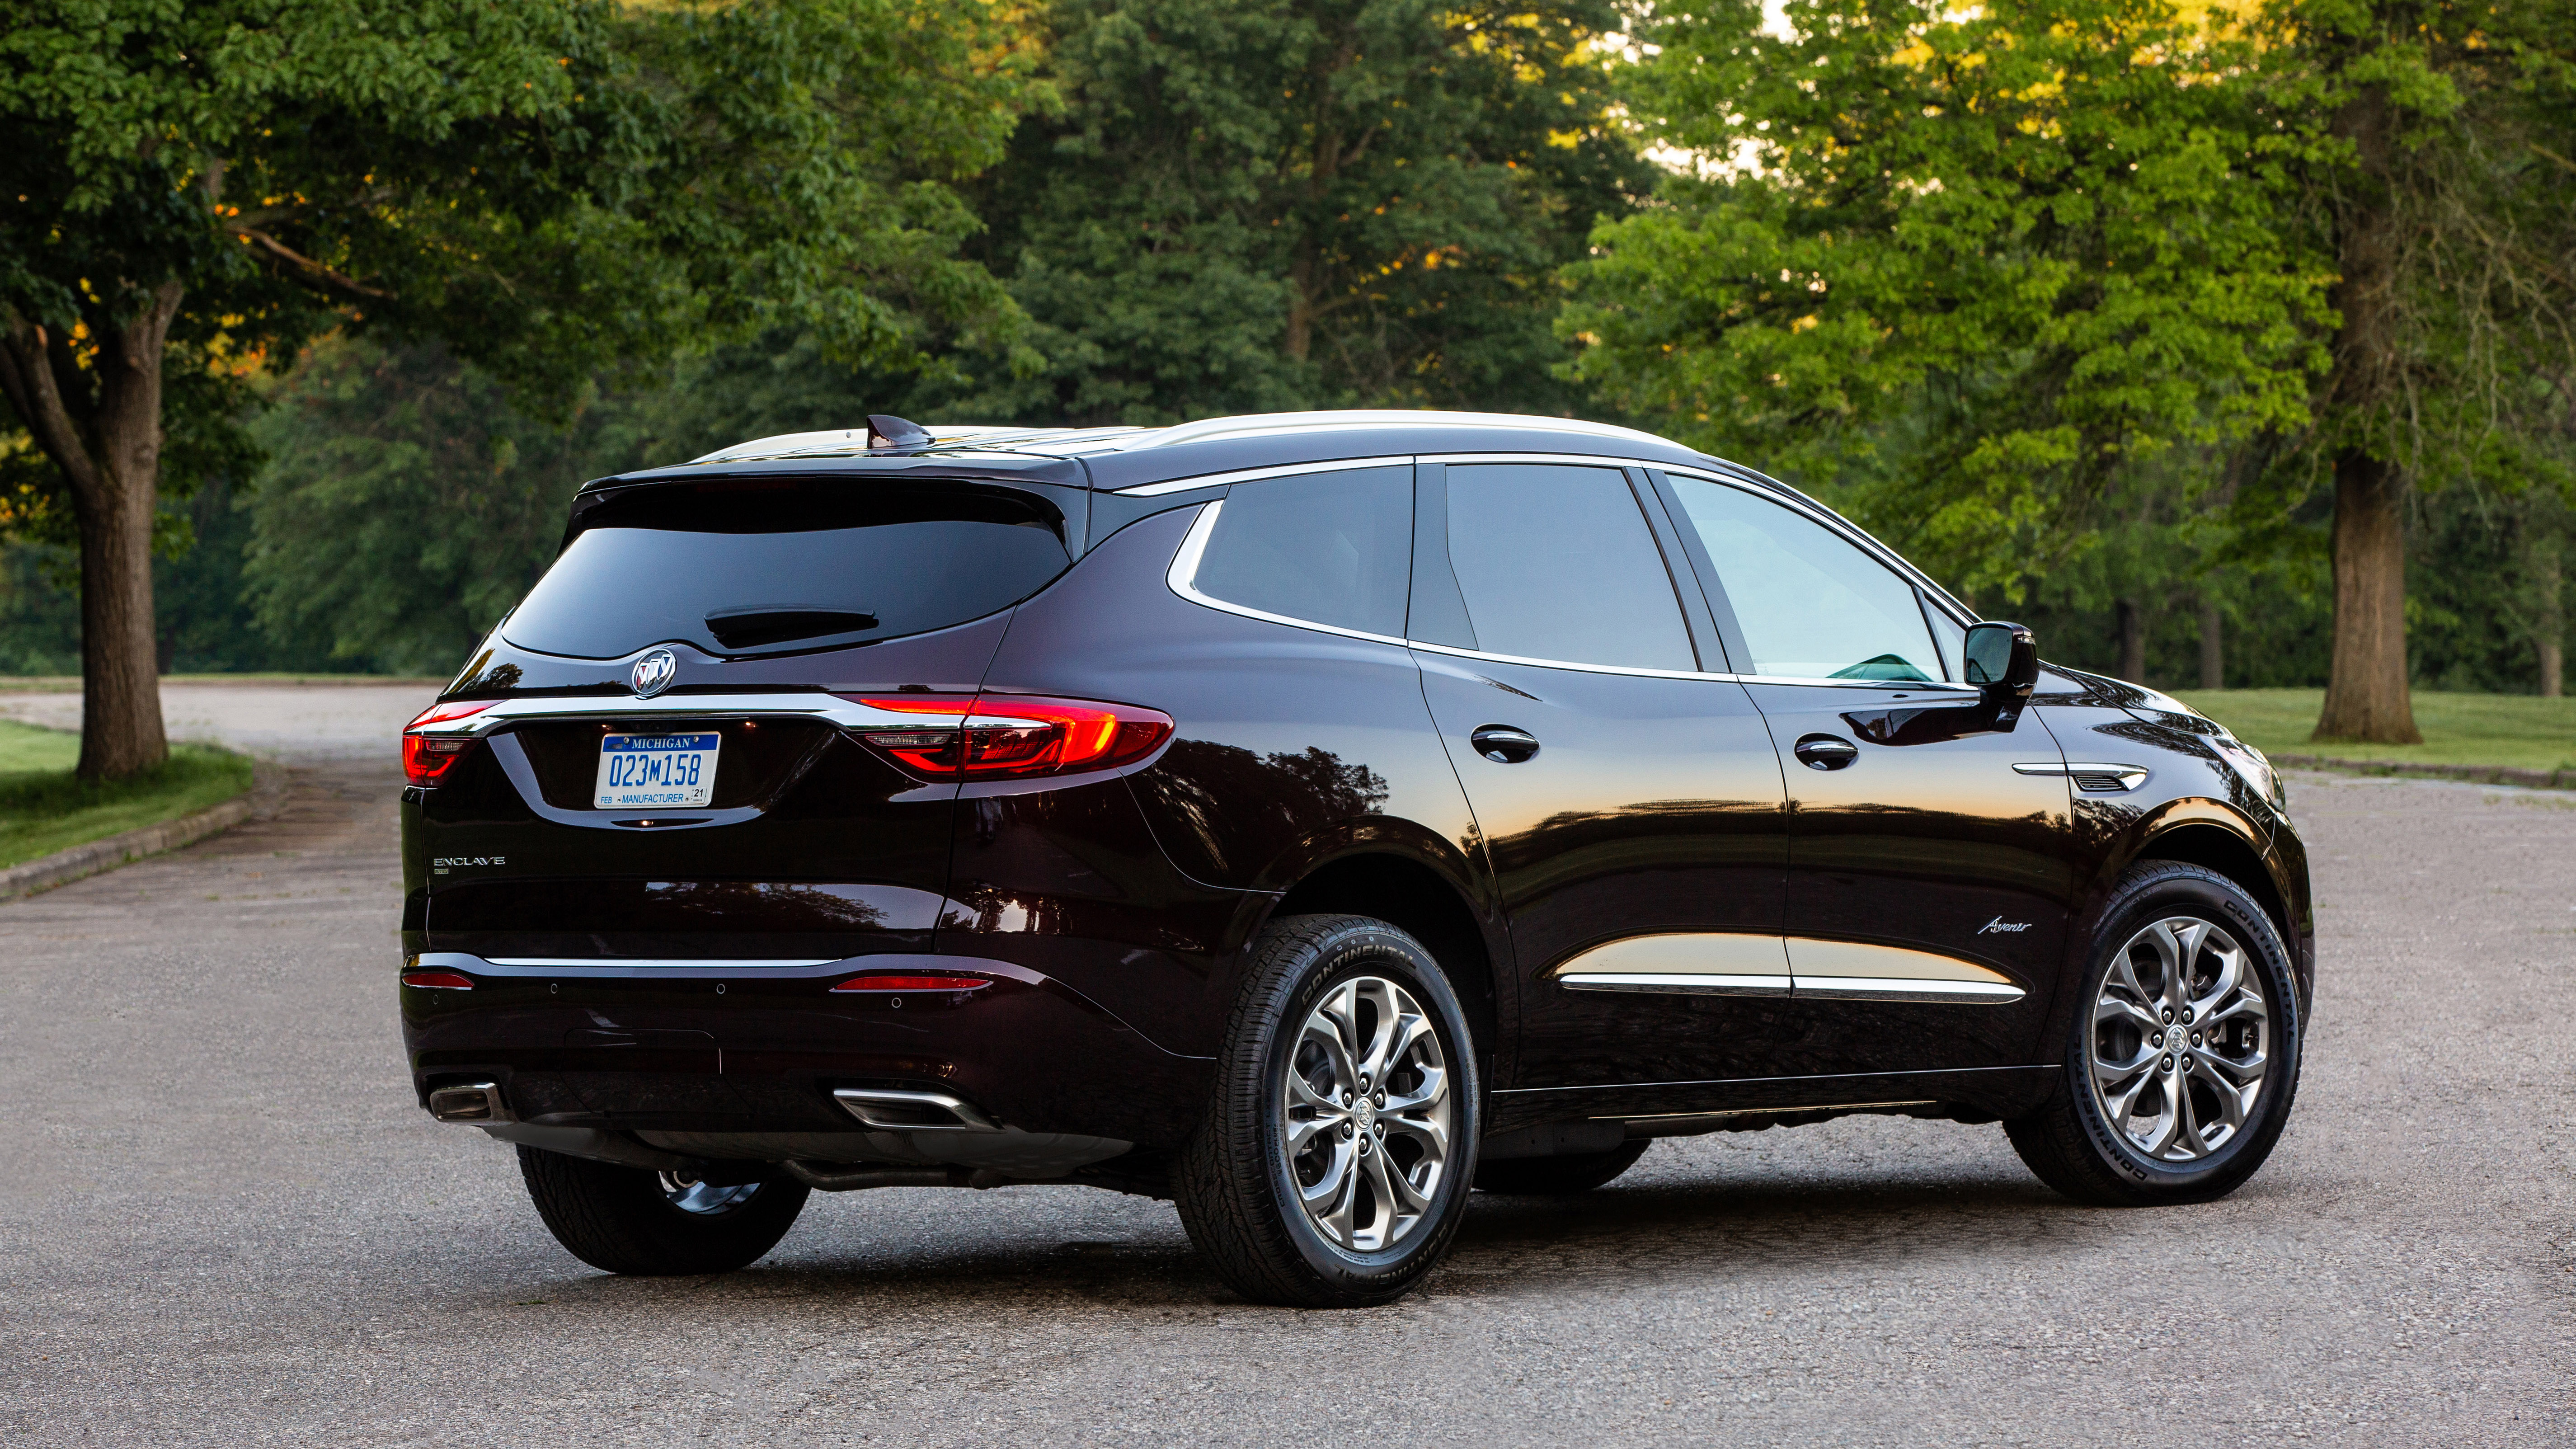 2020 Buick Enclave lineup adds Sport Touring trim, new tech features